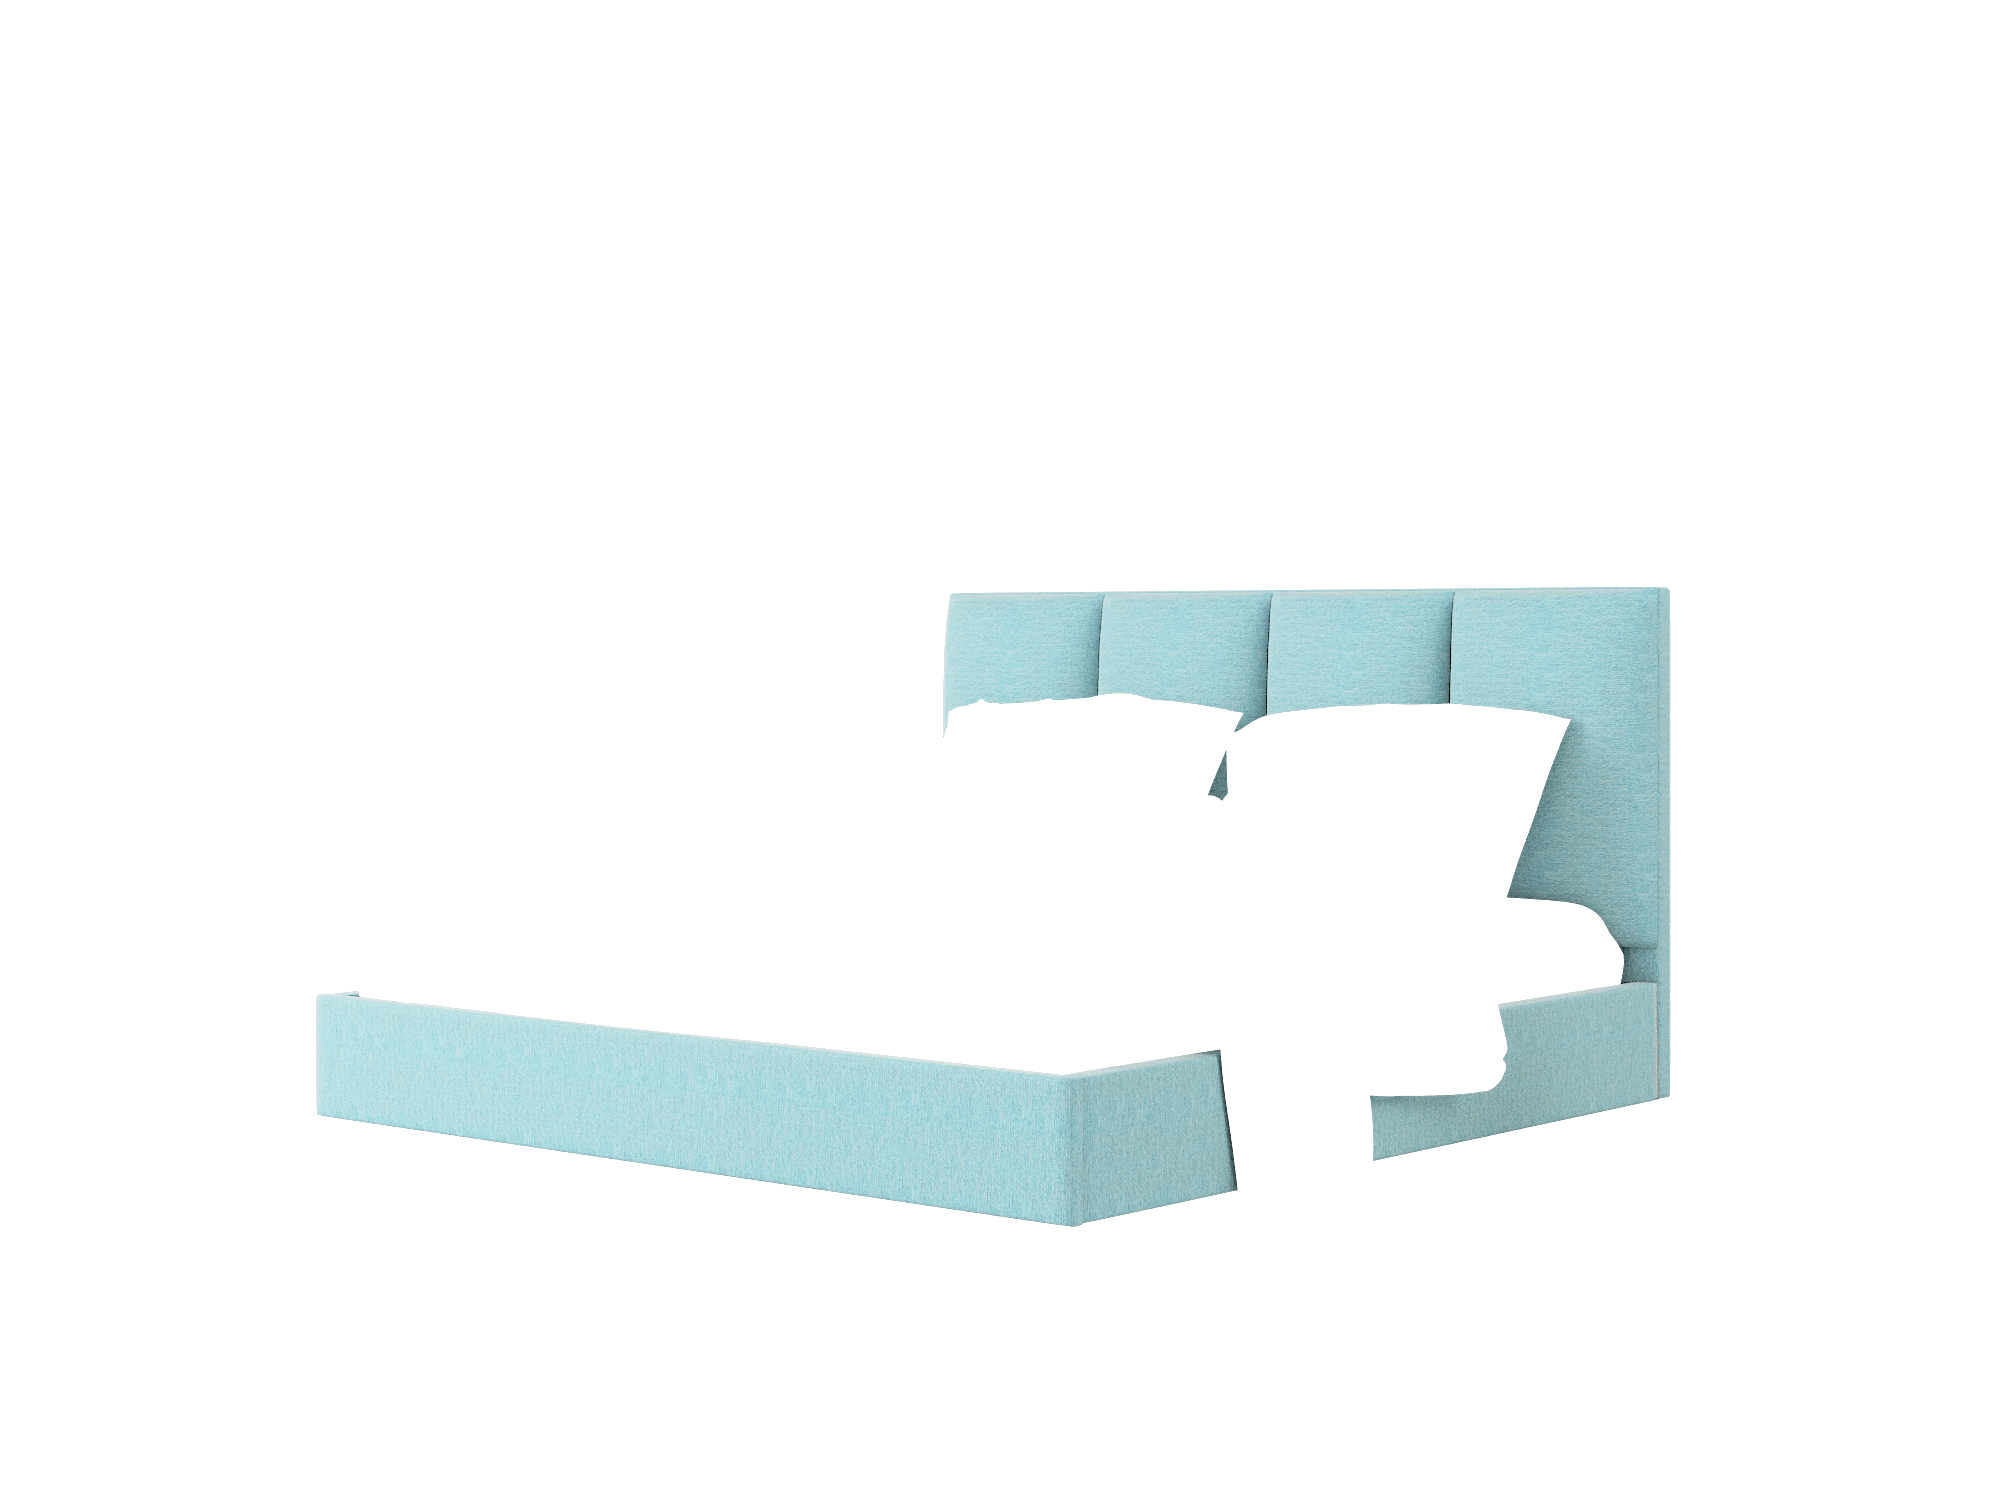 Celine Cosmo Turquoise Bed King Room Texture